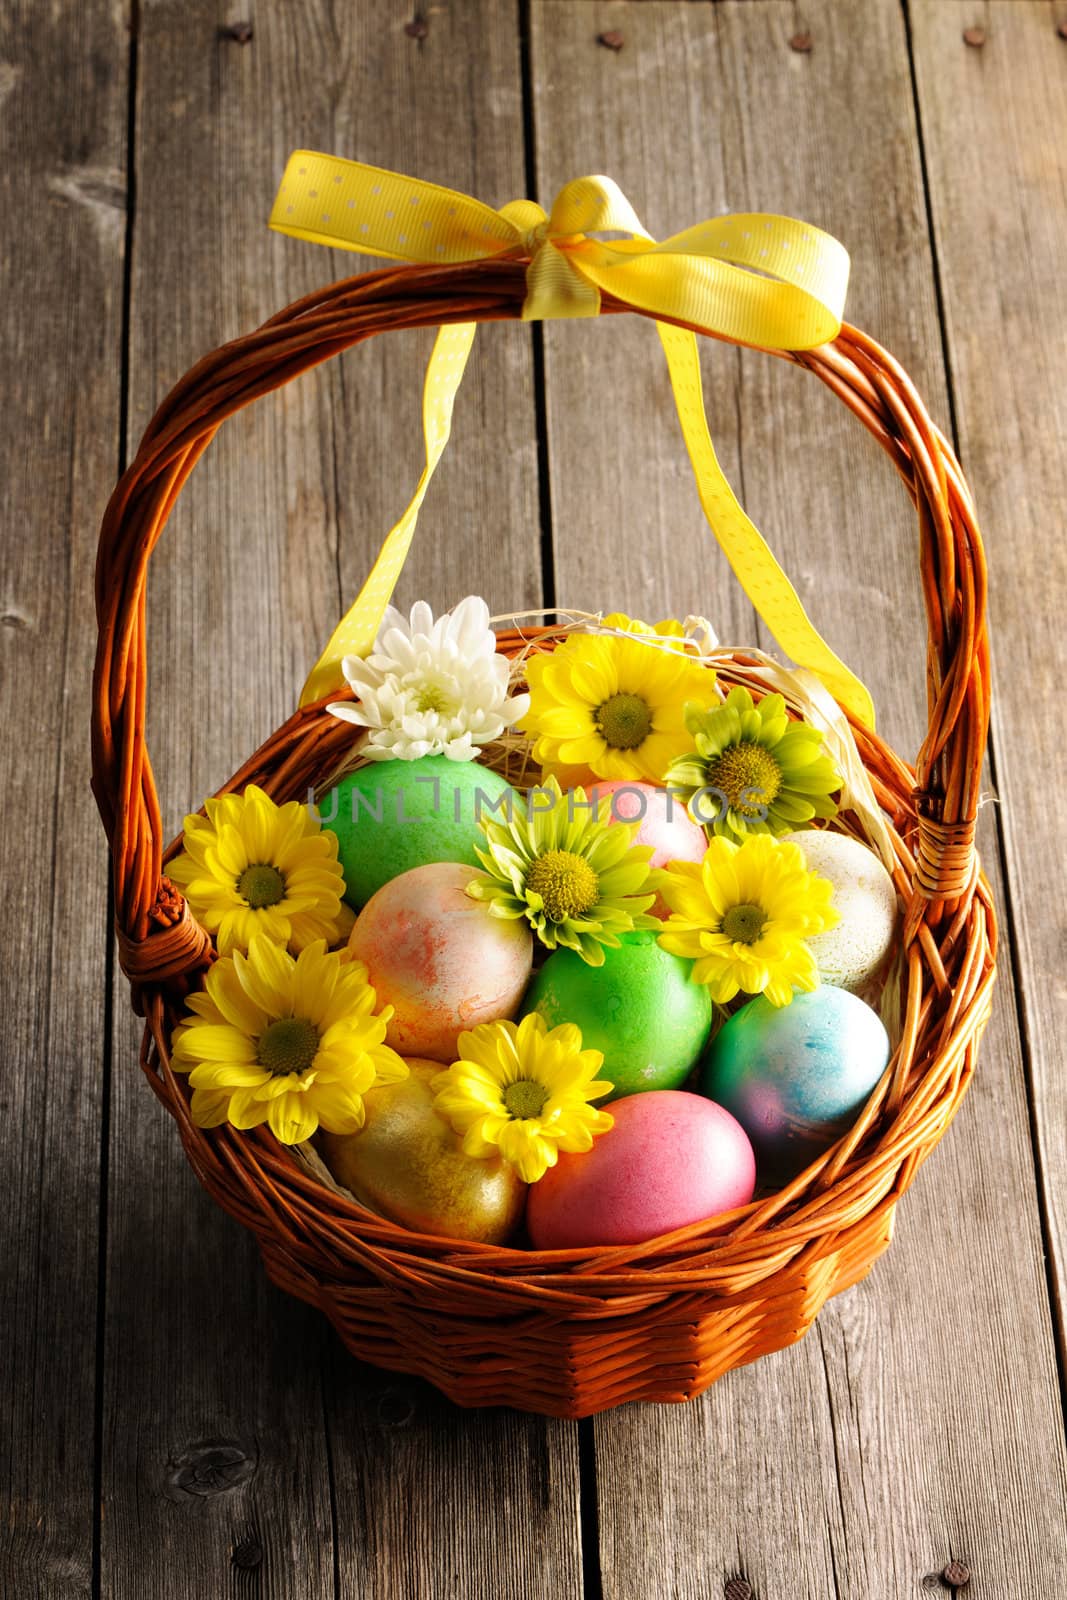 Colored easter eggs in basket on wooden table